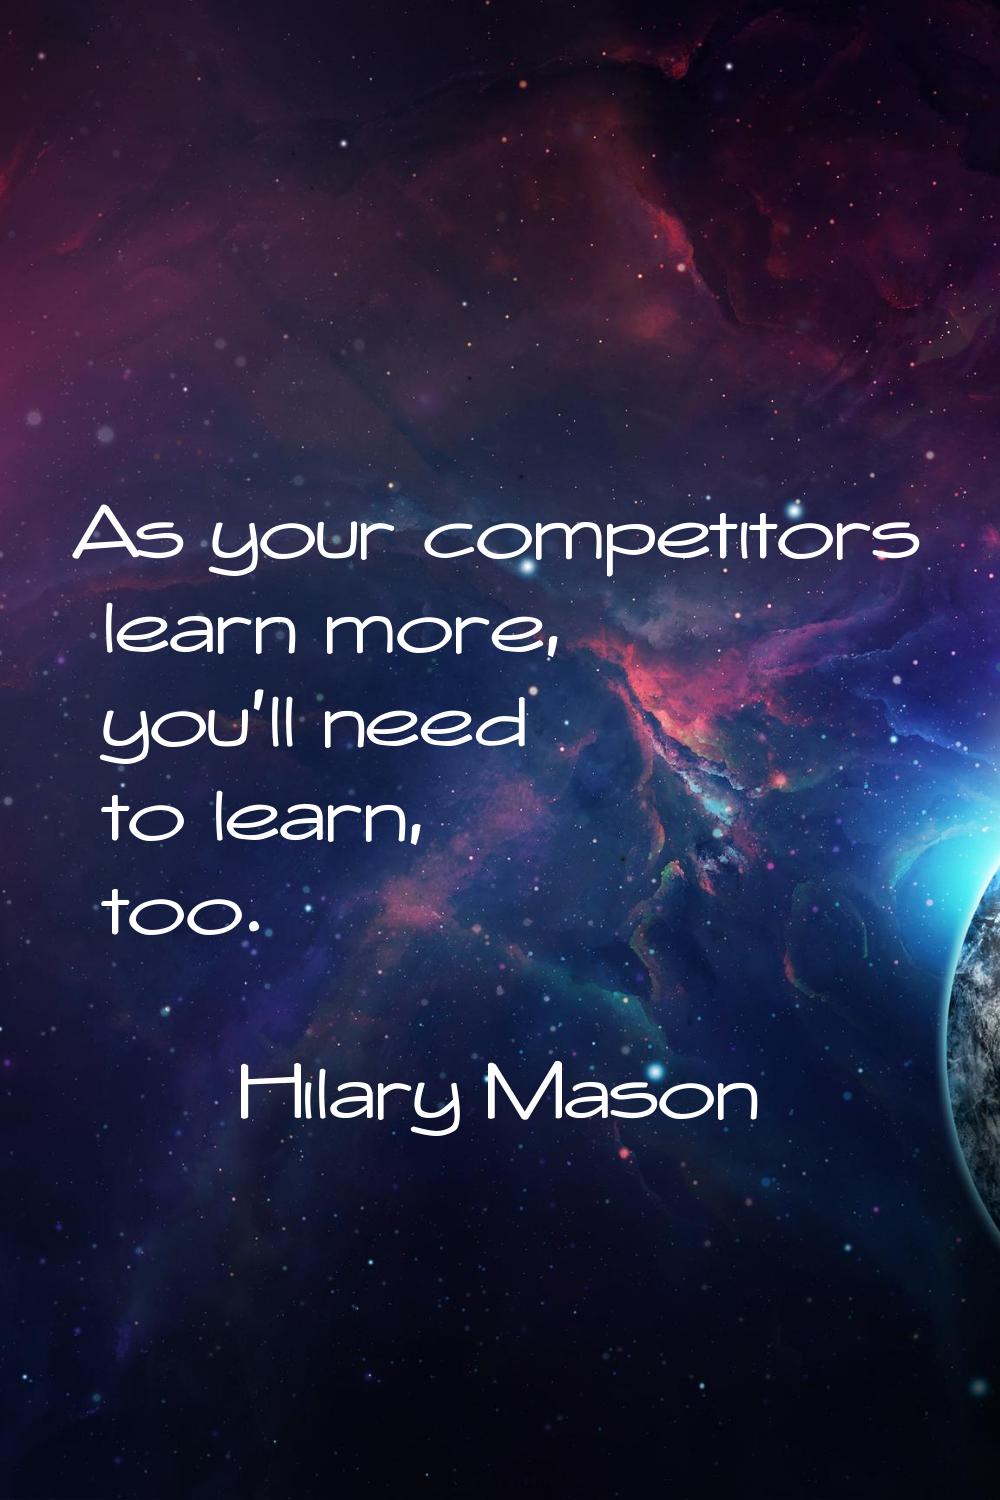 As your competitors learn more, you'll need to learn, too.